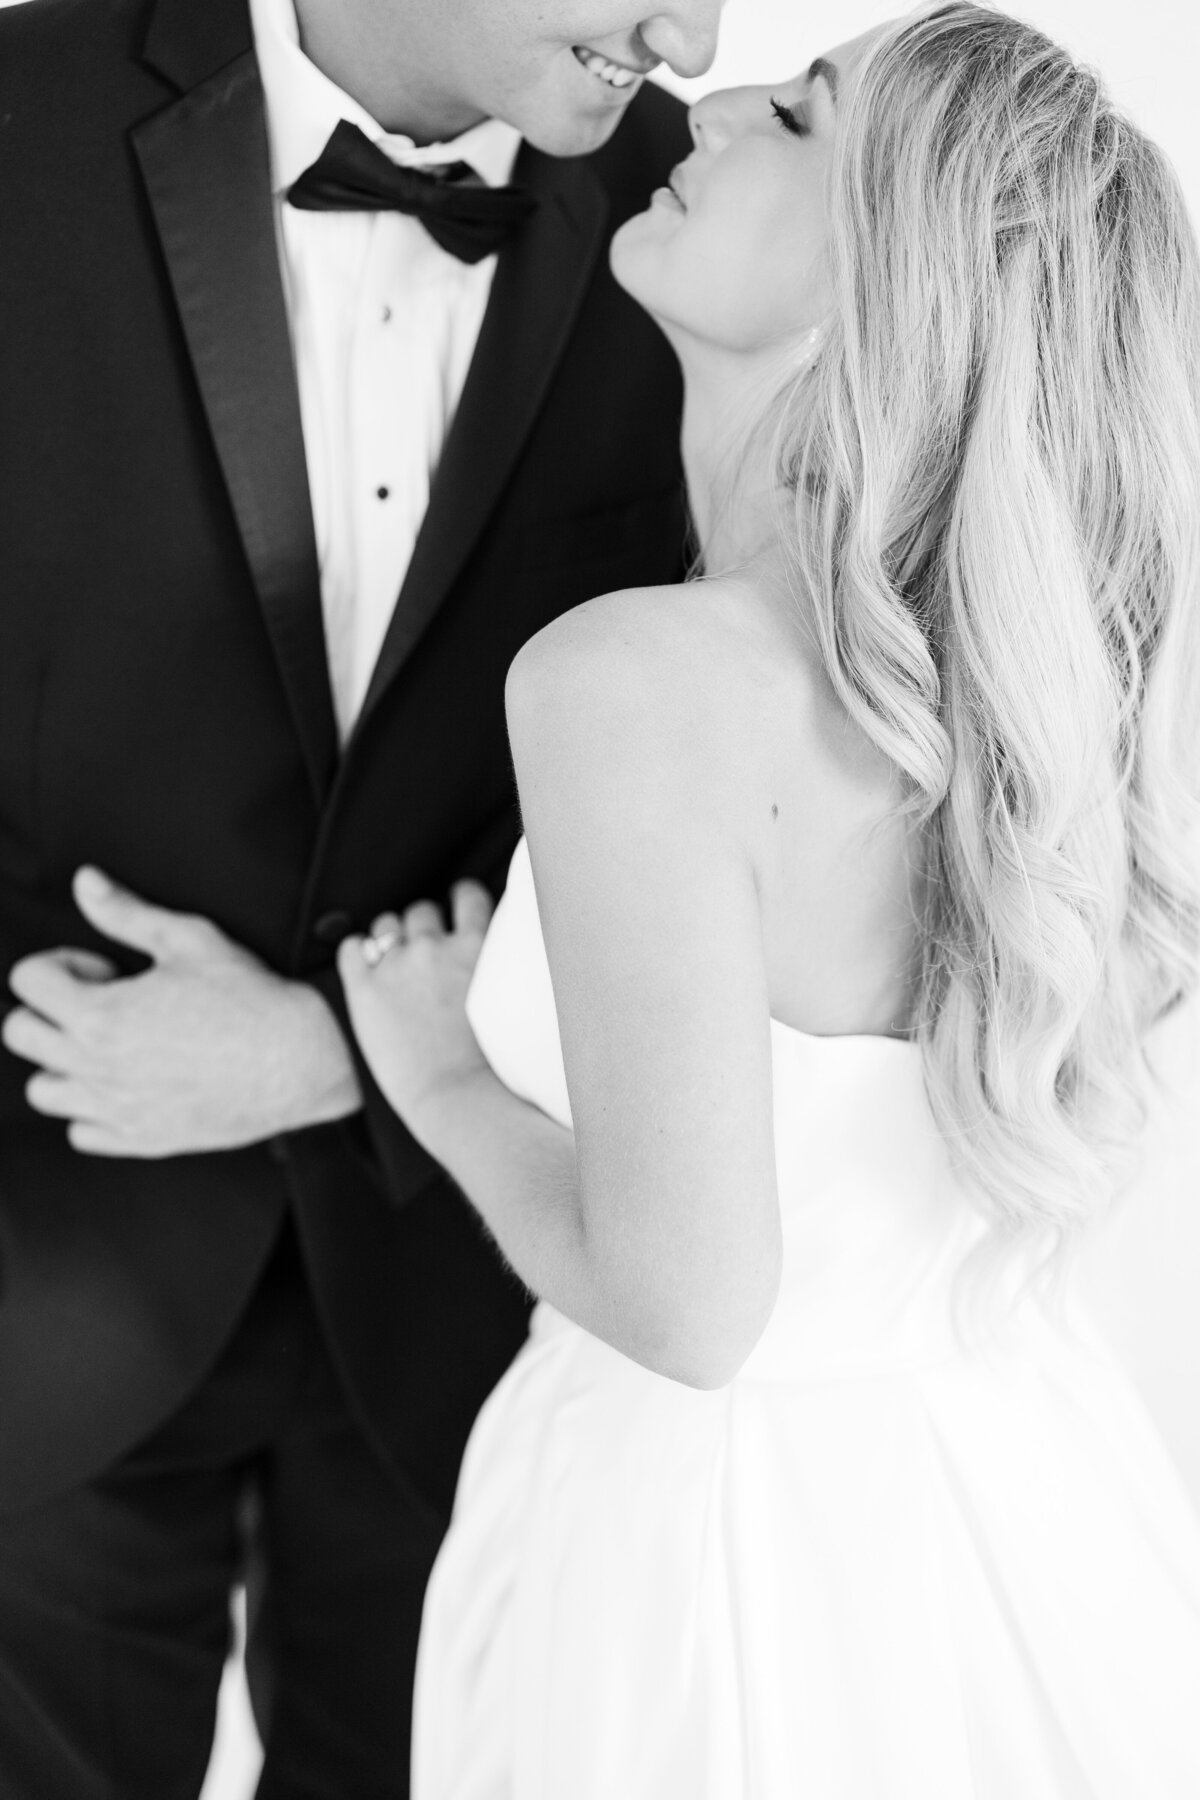 Black and white photo of bride and groom